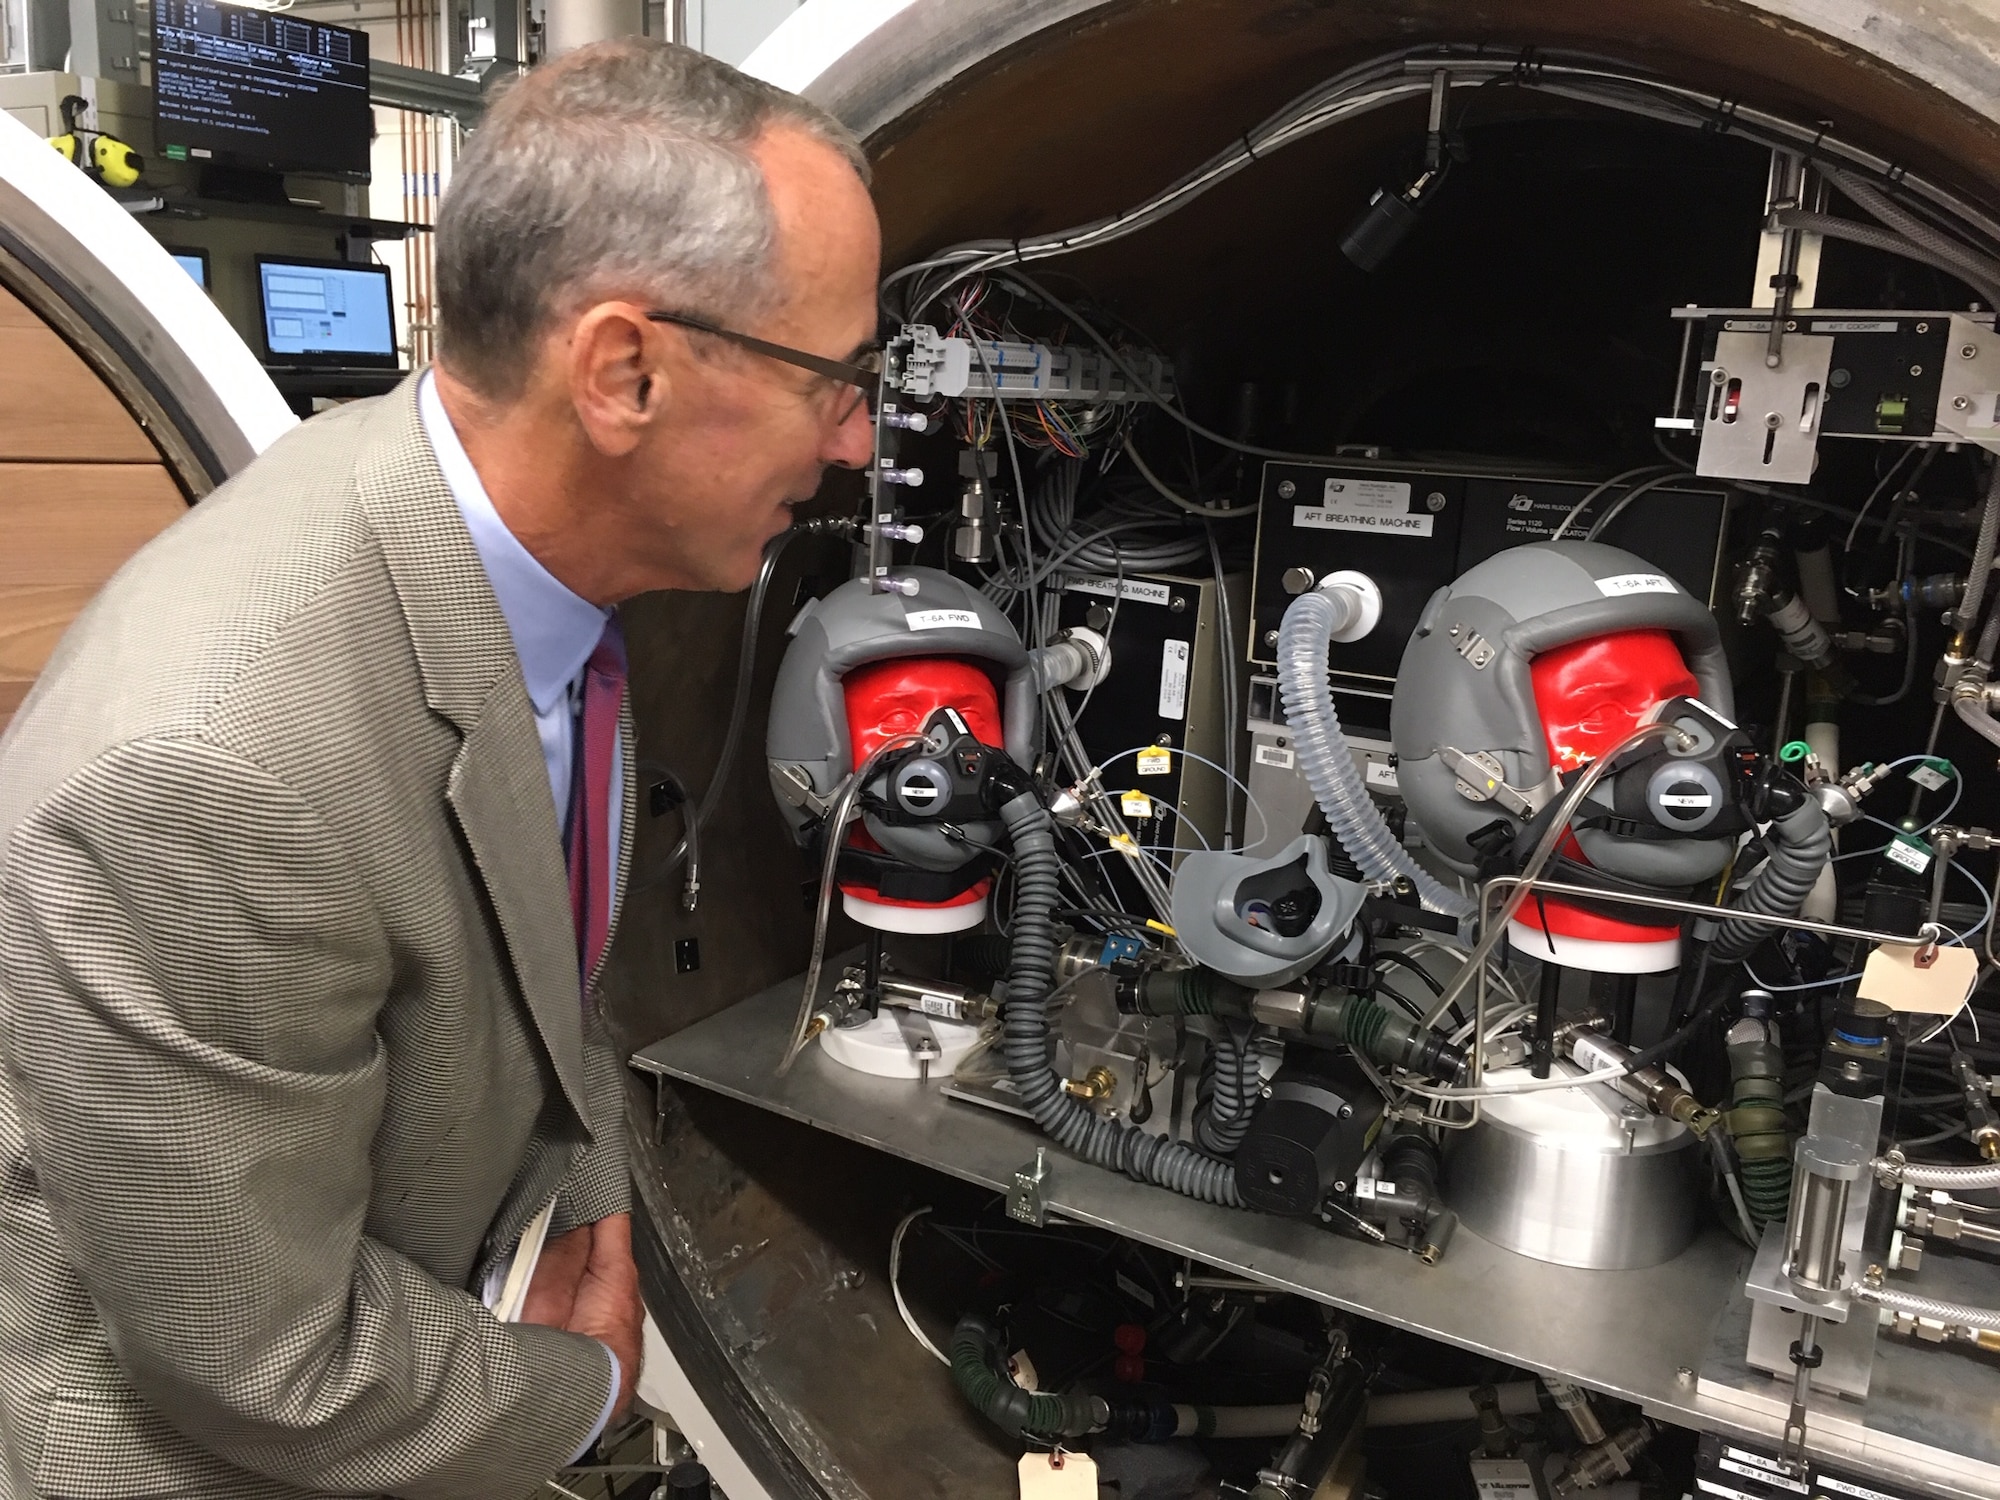 National Commission on Military Aviation Safety commissioner Gen. Raymond E. Johns, (USAF, Ret.) looks over testing equipment at the 711th Human Performance Wing’s On-board Oxygen Generation Systems (OBOGS) Laboratory Sept. 11, 2019 during the commission’s visit to Wright-Patterson Air Force Base. (National Commission on Military Aviation Safety photo/Bryan Whitman)